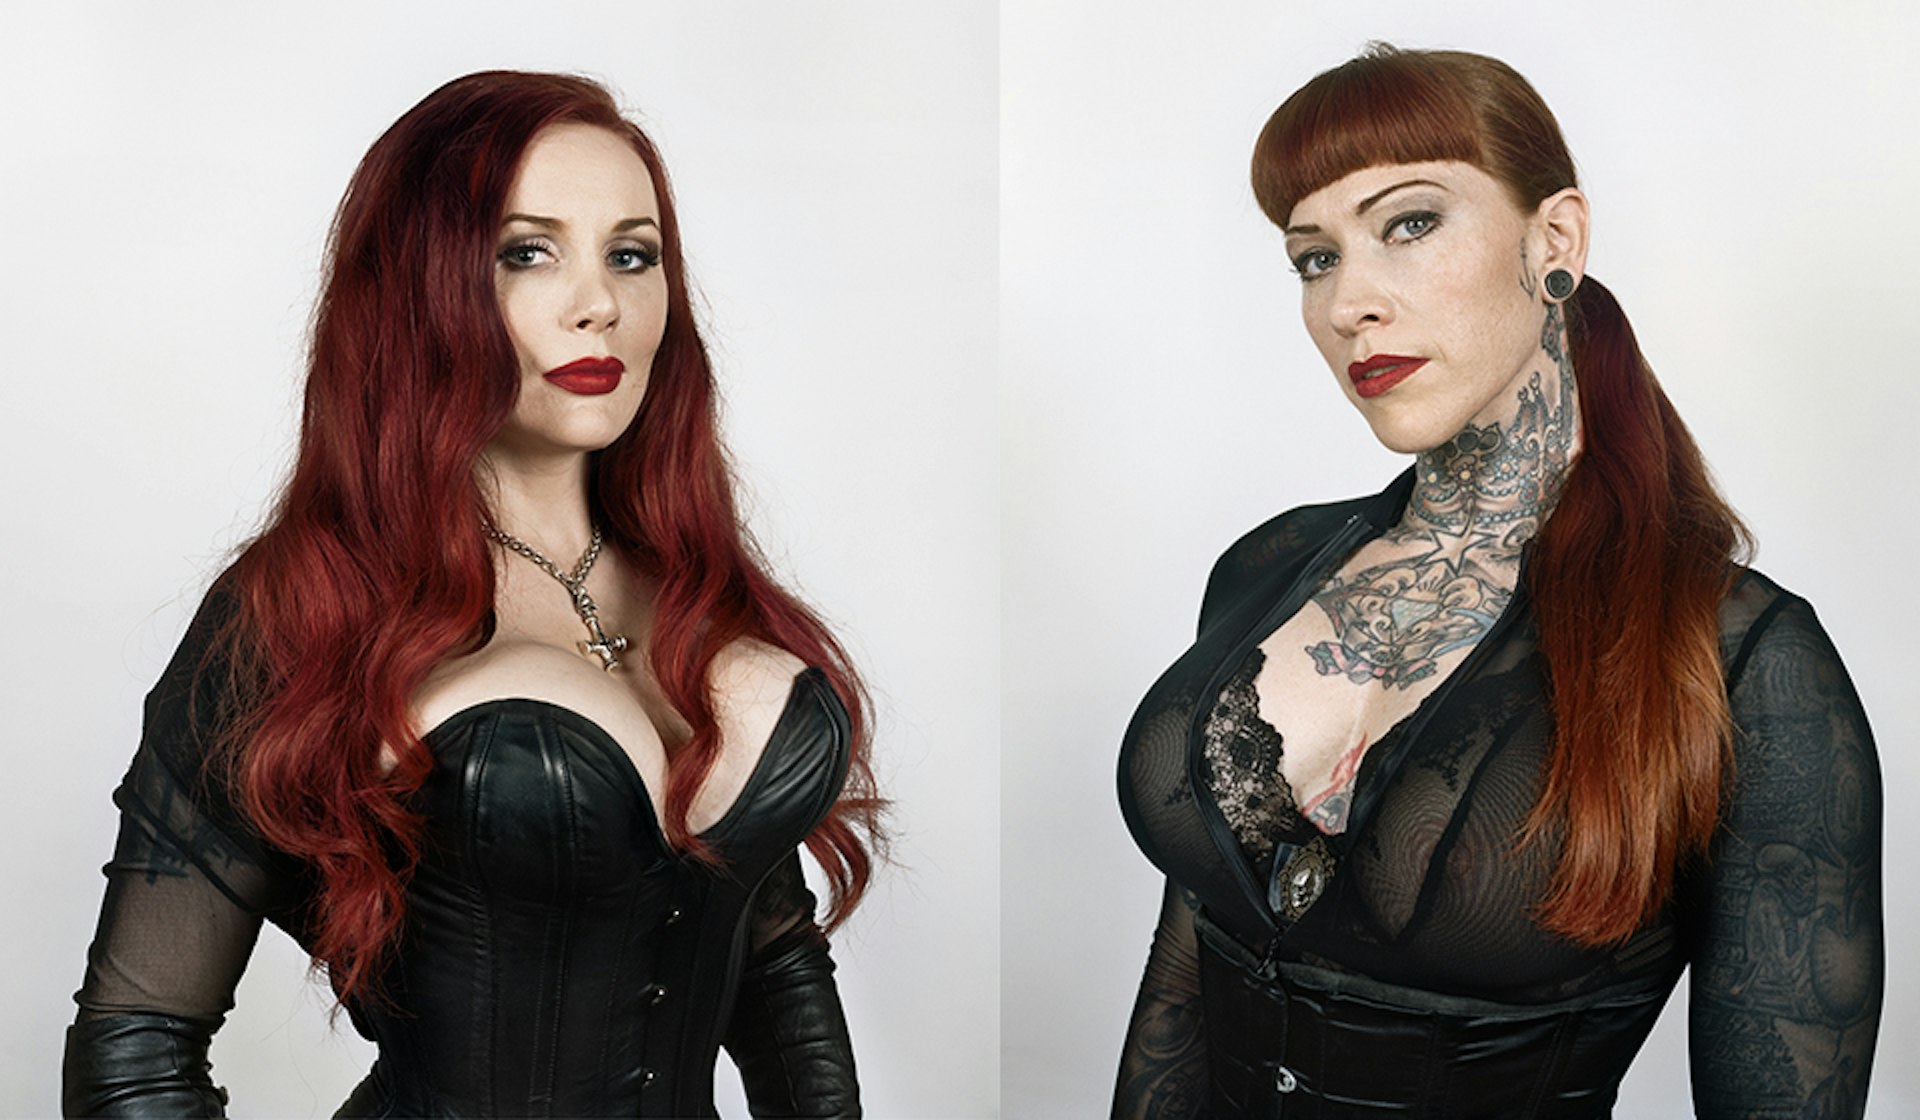 The photographer uncovering BDSM's vulnerable heart